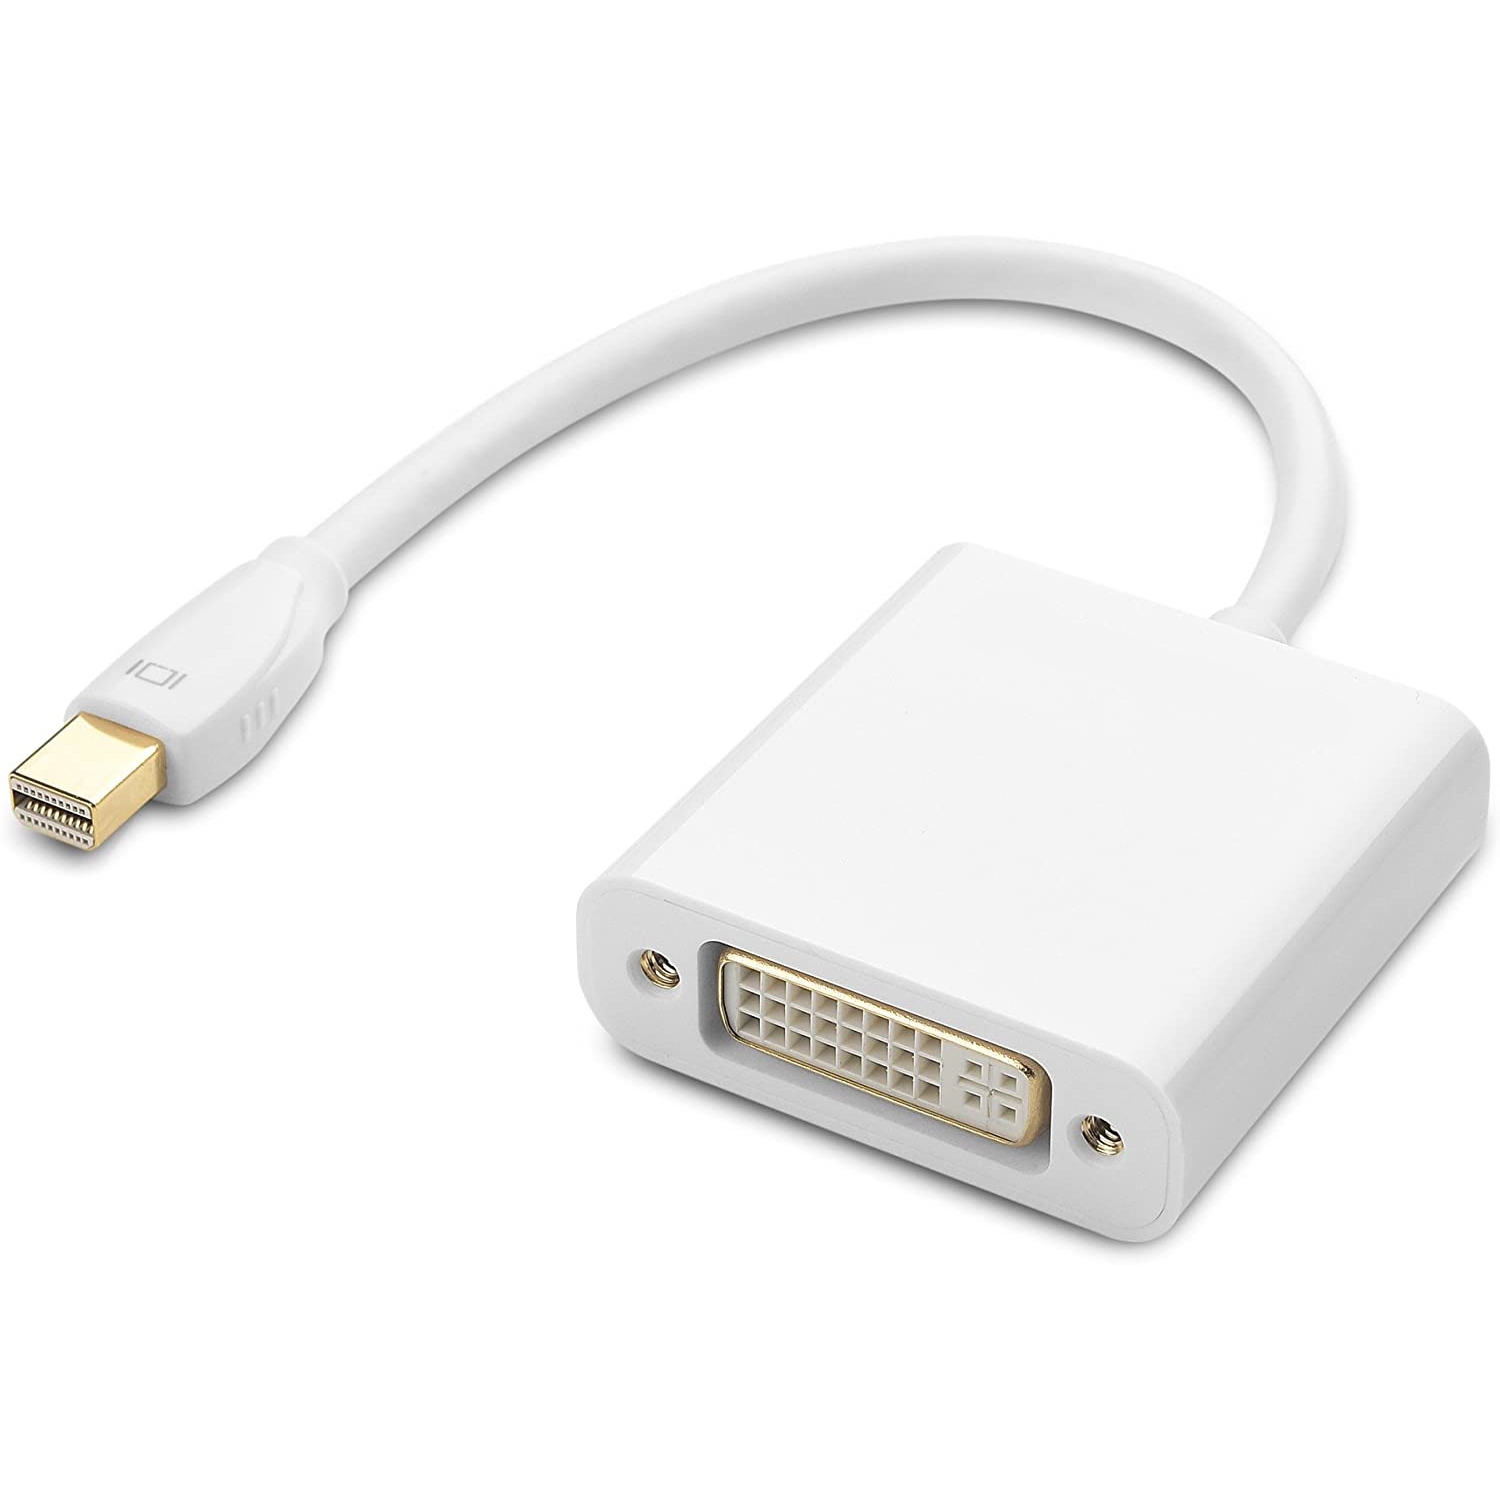 ISTAR Gold-Plated Mini DP to DVI (Thunderbolt Compatible) Male to Female Adapter Compatible with MacBook Air/Pro, Microsoft Surface Pro/Dock, Monitor, Projector and More